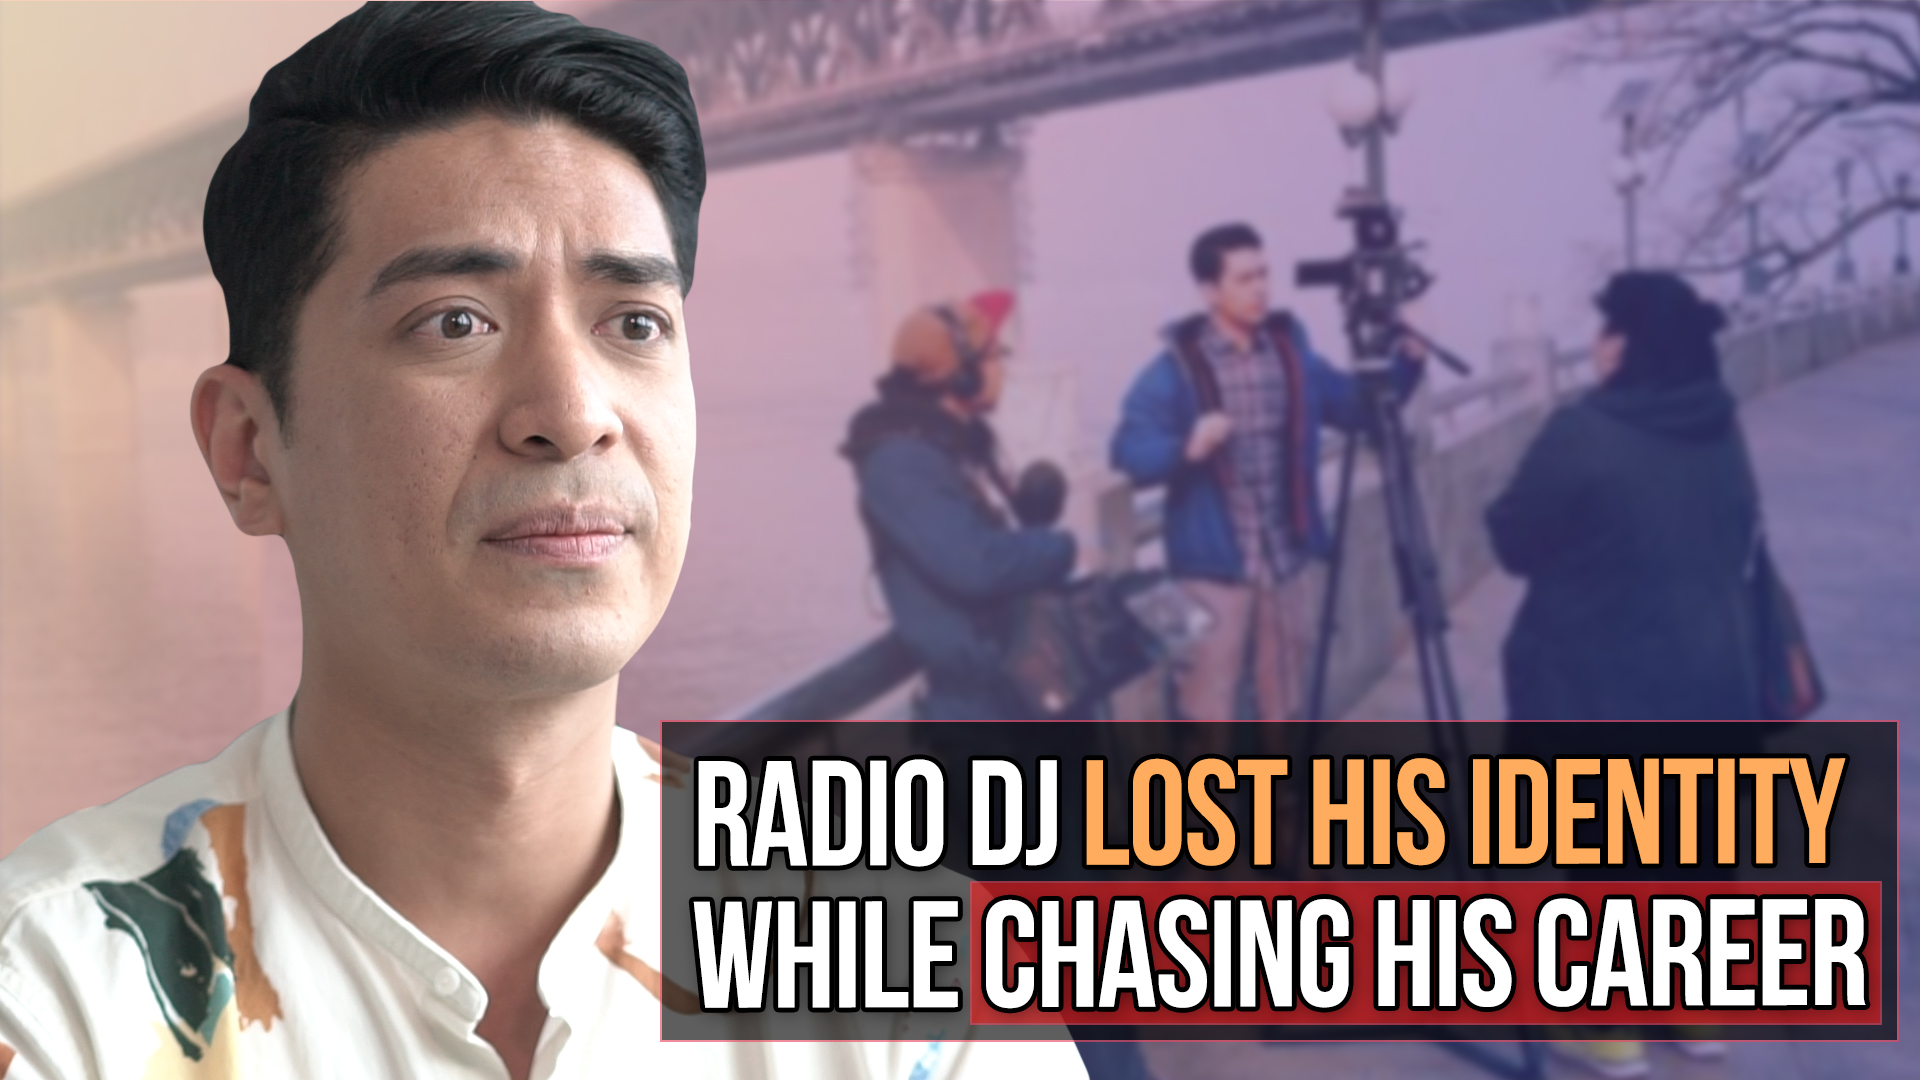 Radio DJ lost his identity while chasing his career